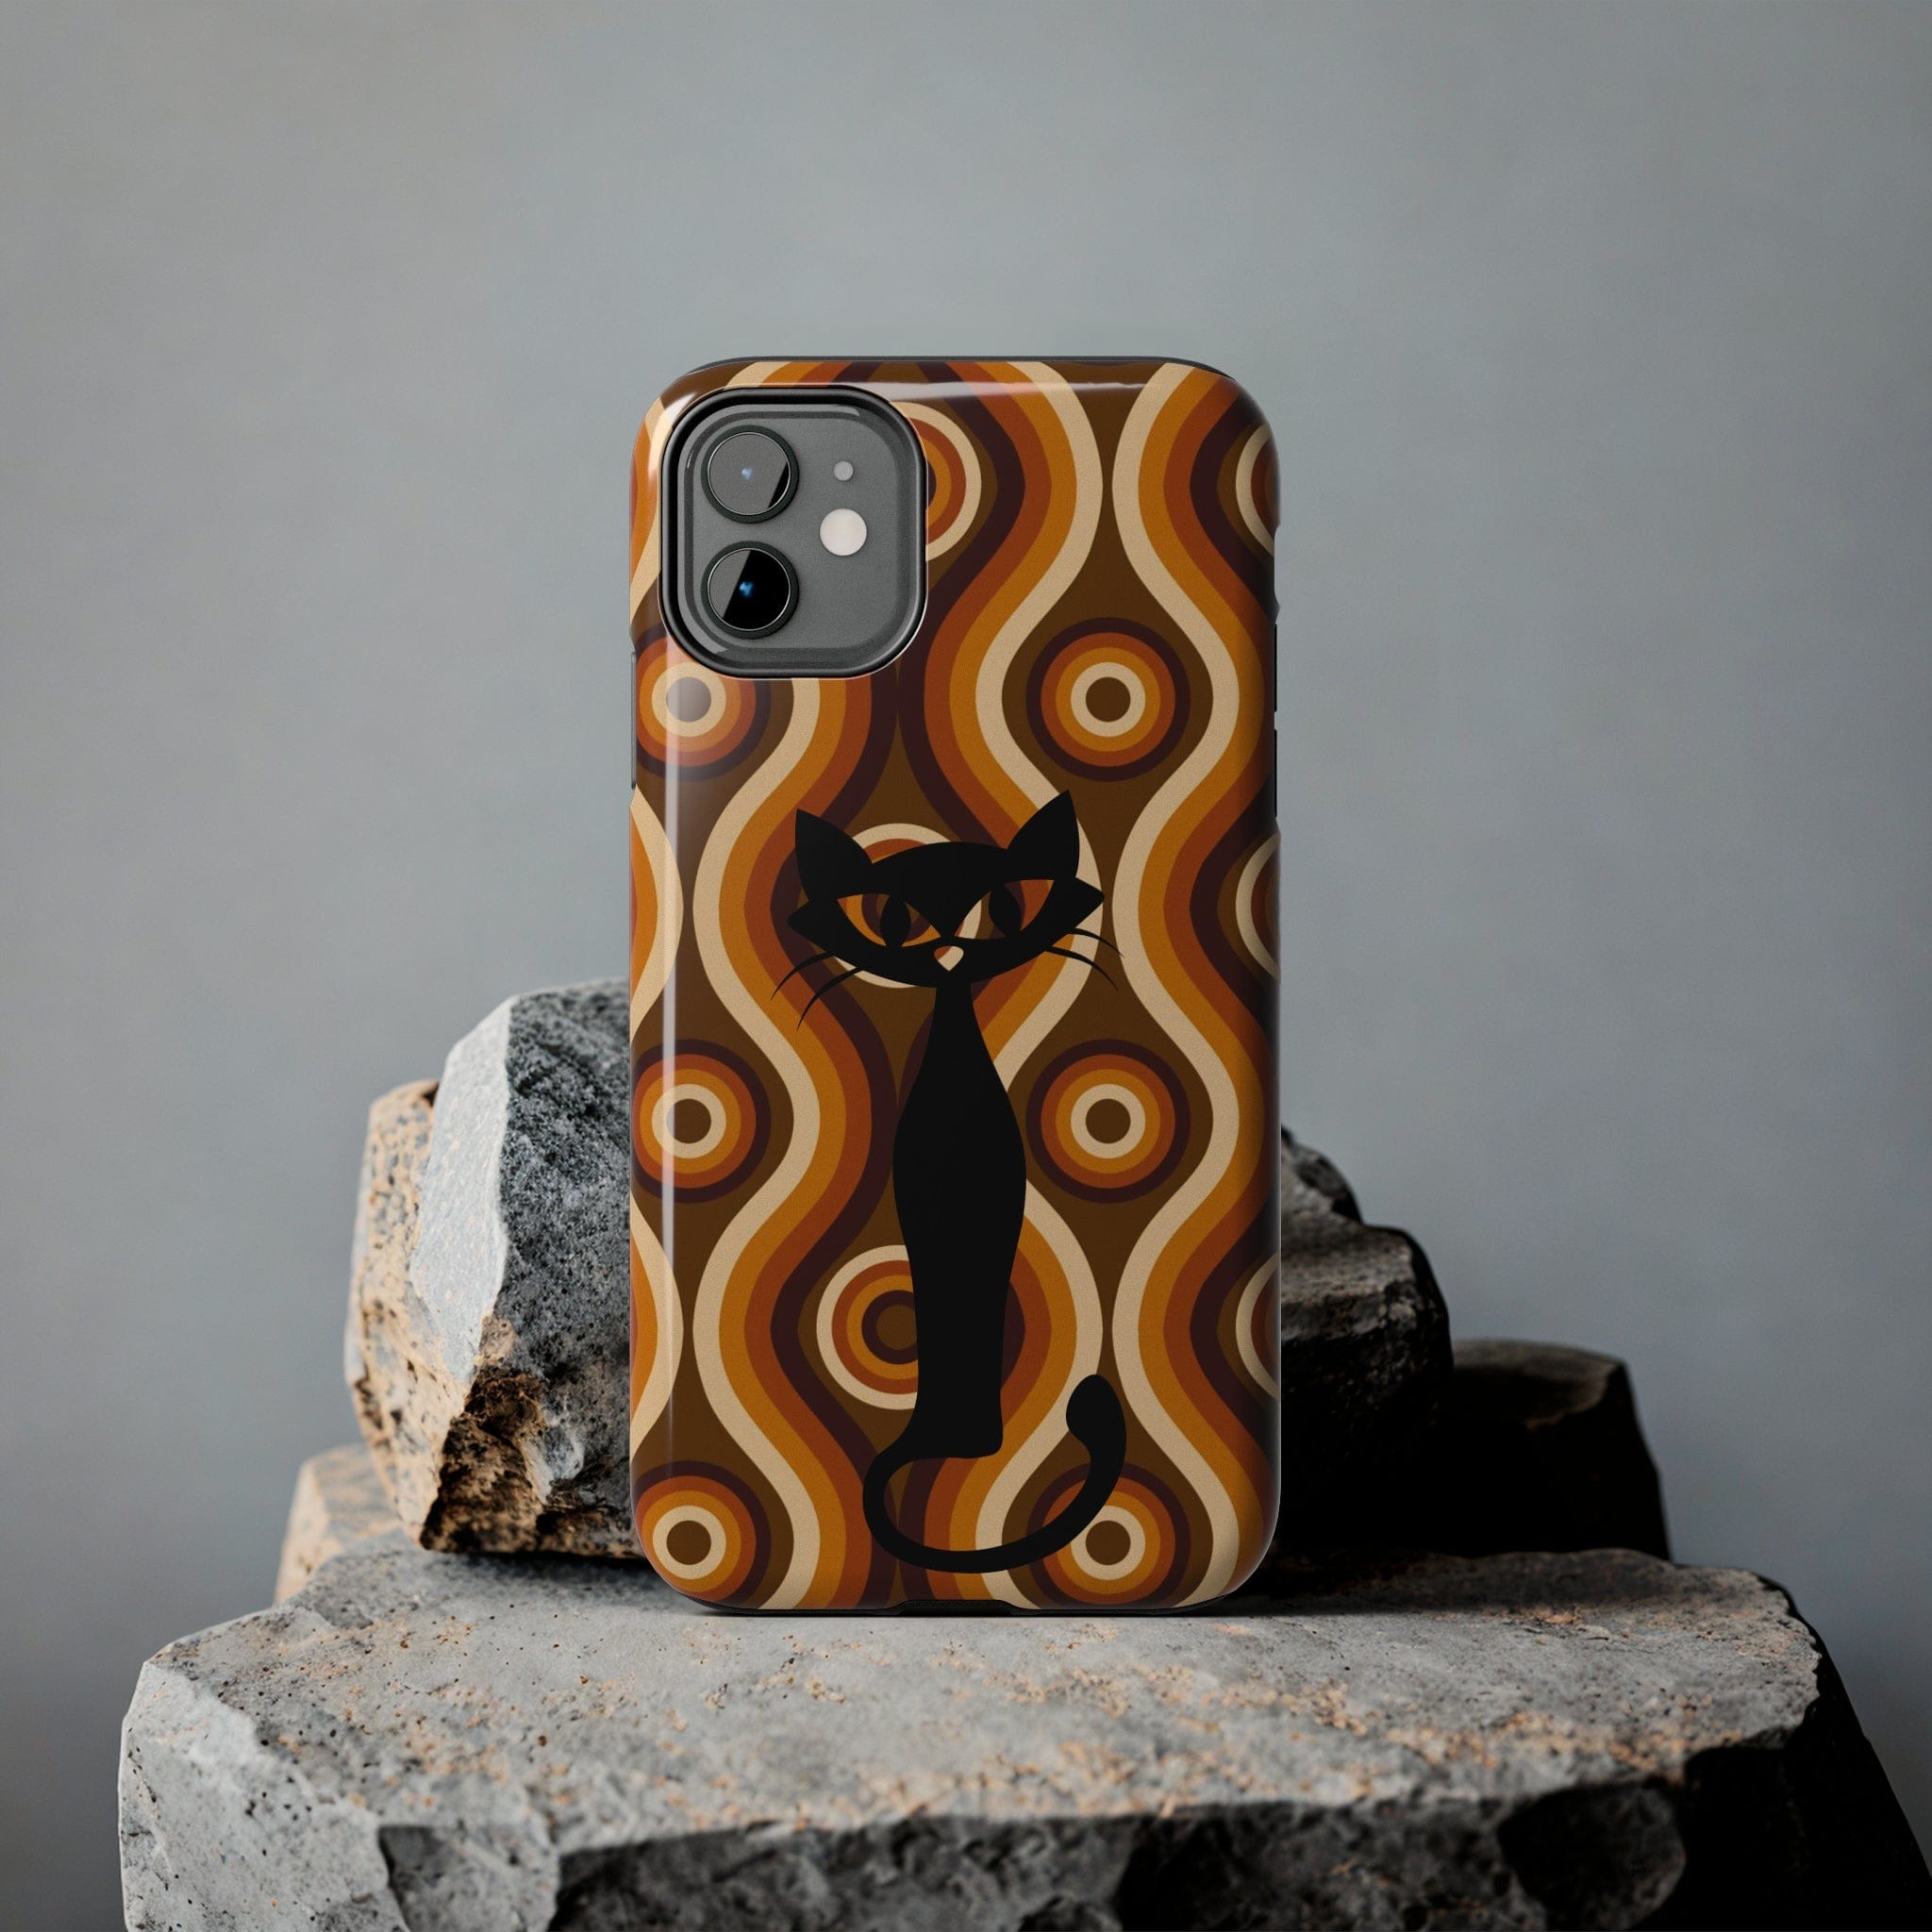 Retro Phone Case, Groovy Brown, Atomic Kitsch Cat Tough Smart Phone Cases Phone Case iPhone 11